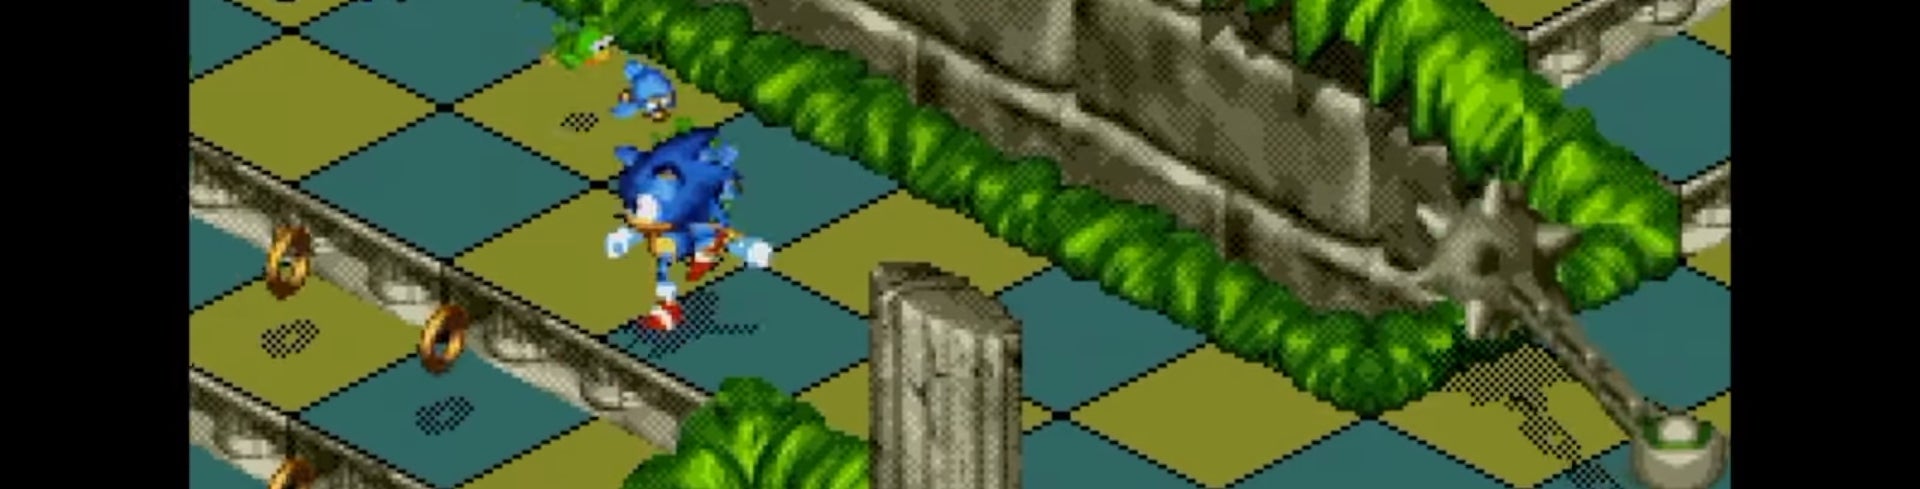 Image for Why the founder of Traveller's Tales released a director's cut of an old Sonic game 25 years later